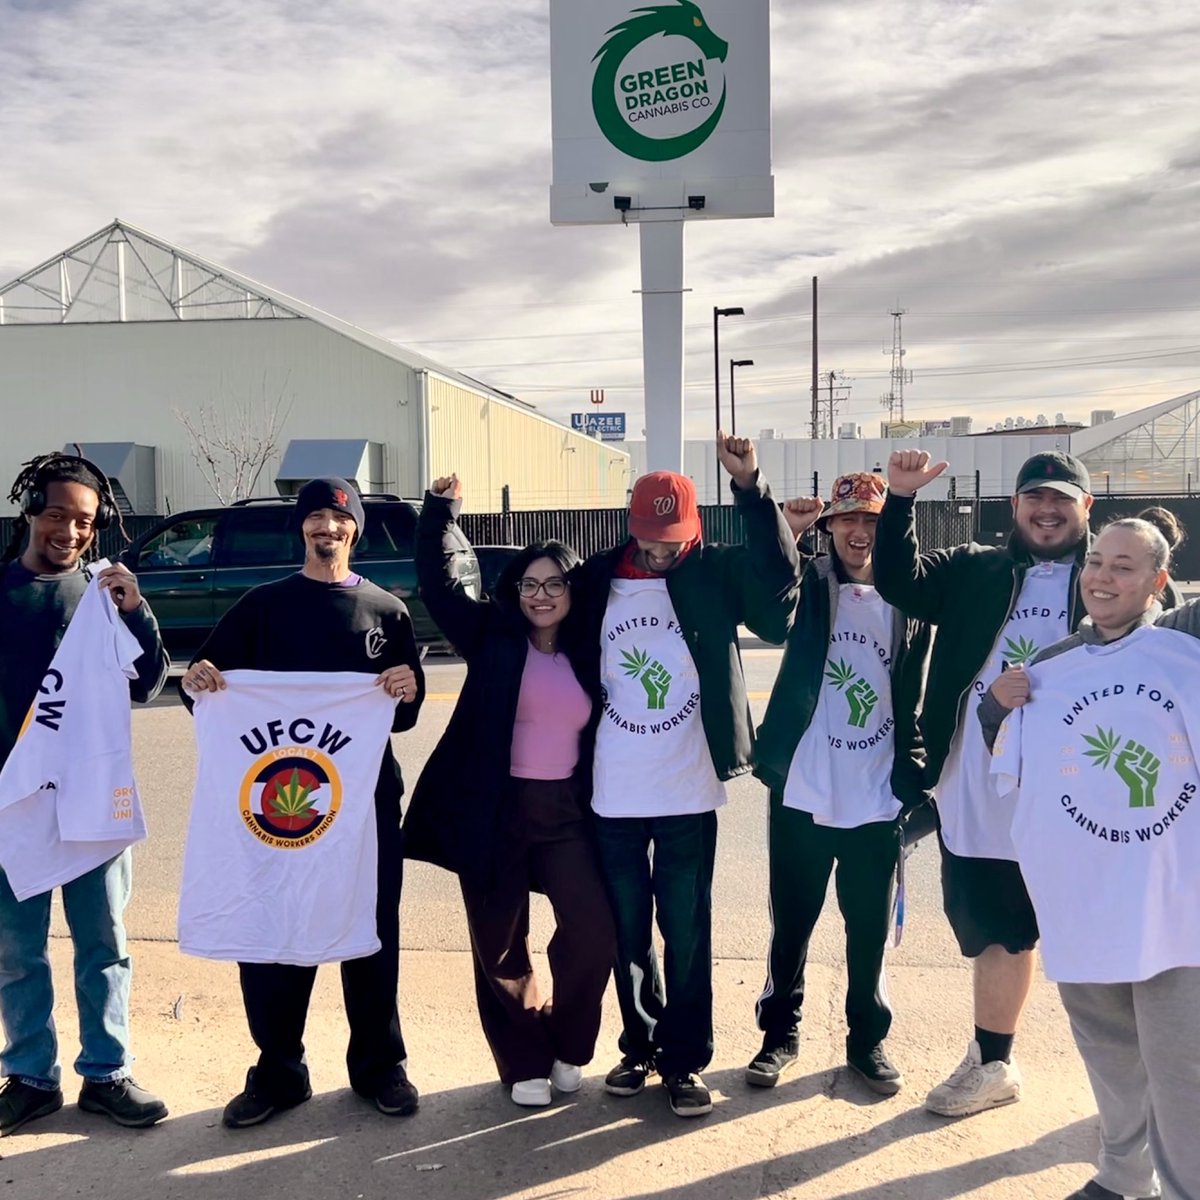 Today our Green Dragon Grow House members met with their new Union Representative and received some new union swag to represent in their facility! Welcome to Local 7!! #letsgrowyourunion #cannabisunion #unitedforcannabisworkers #unionstrong #ufcw7 #5280